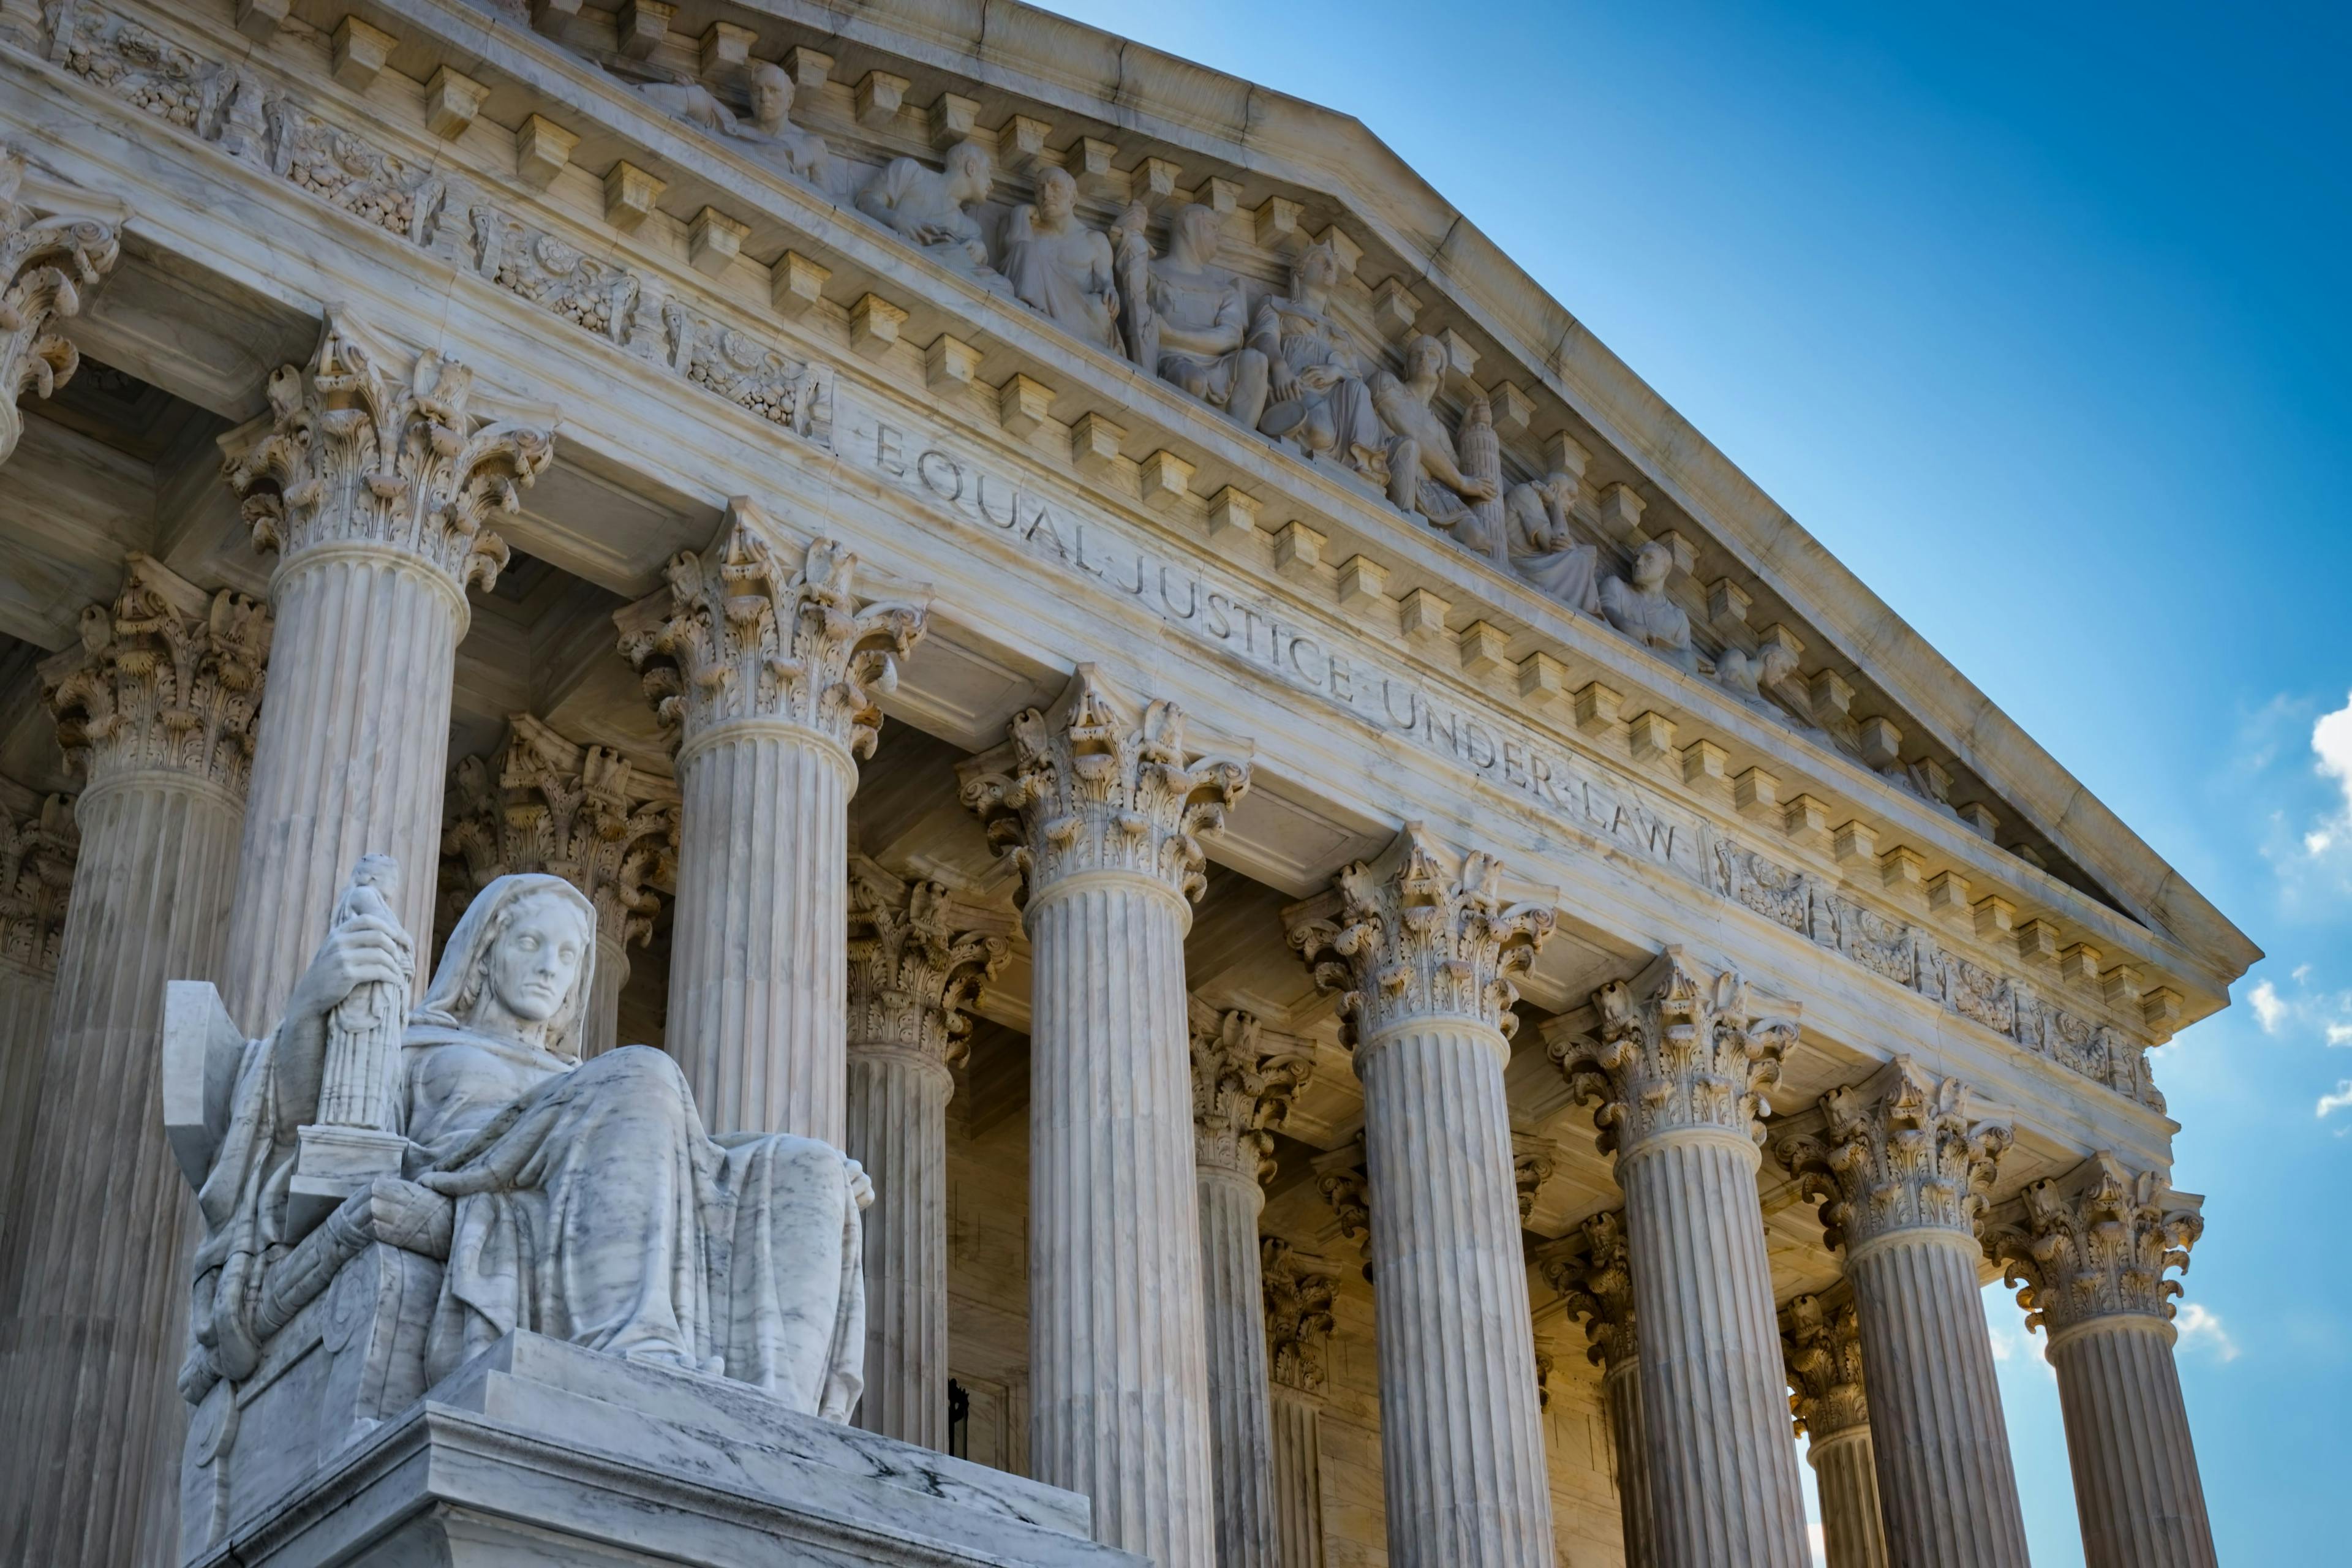 Medical colleges and universities say the Supreme Court's ruling on affirmative action is a serious setback to efforts to improve their diversity. The court ruled colleges can't use race as a factor in admissions. (Image credit: ©Bill Chizek - stock.adobe.com)